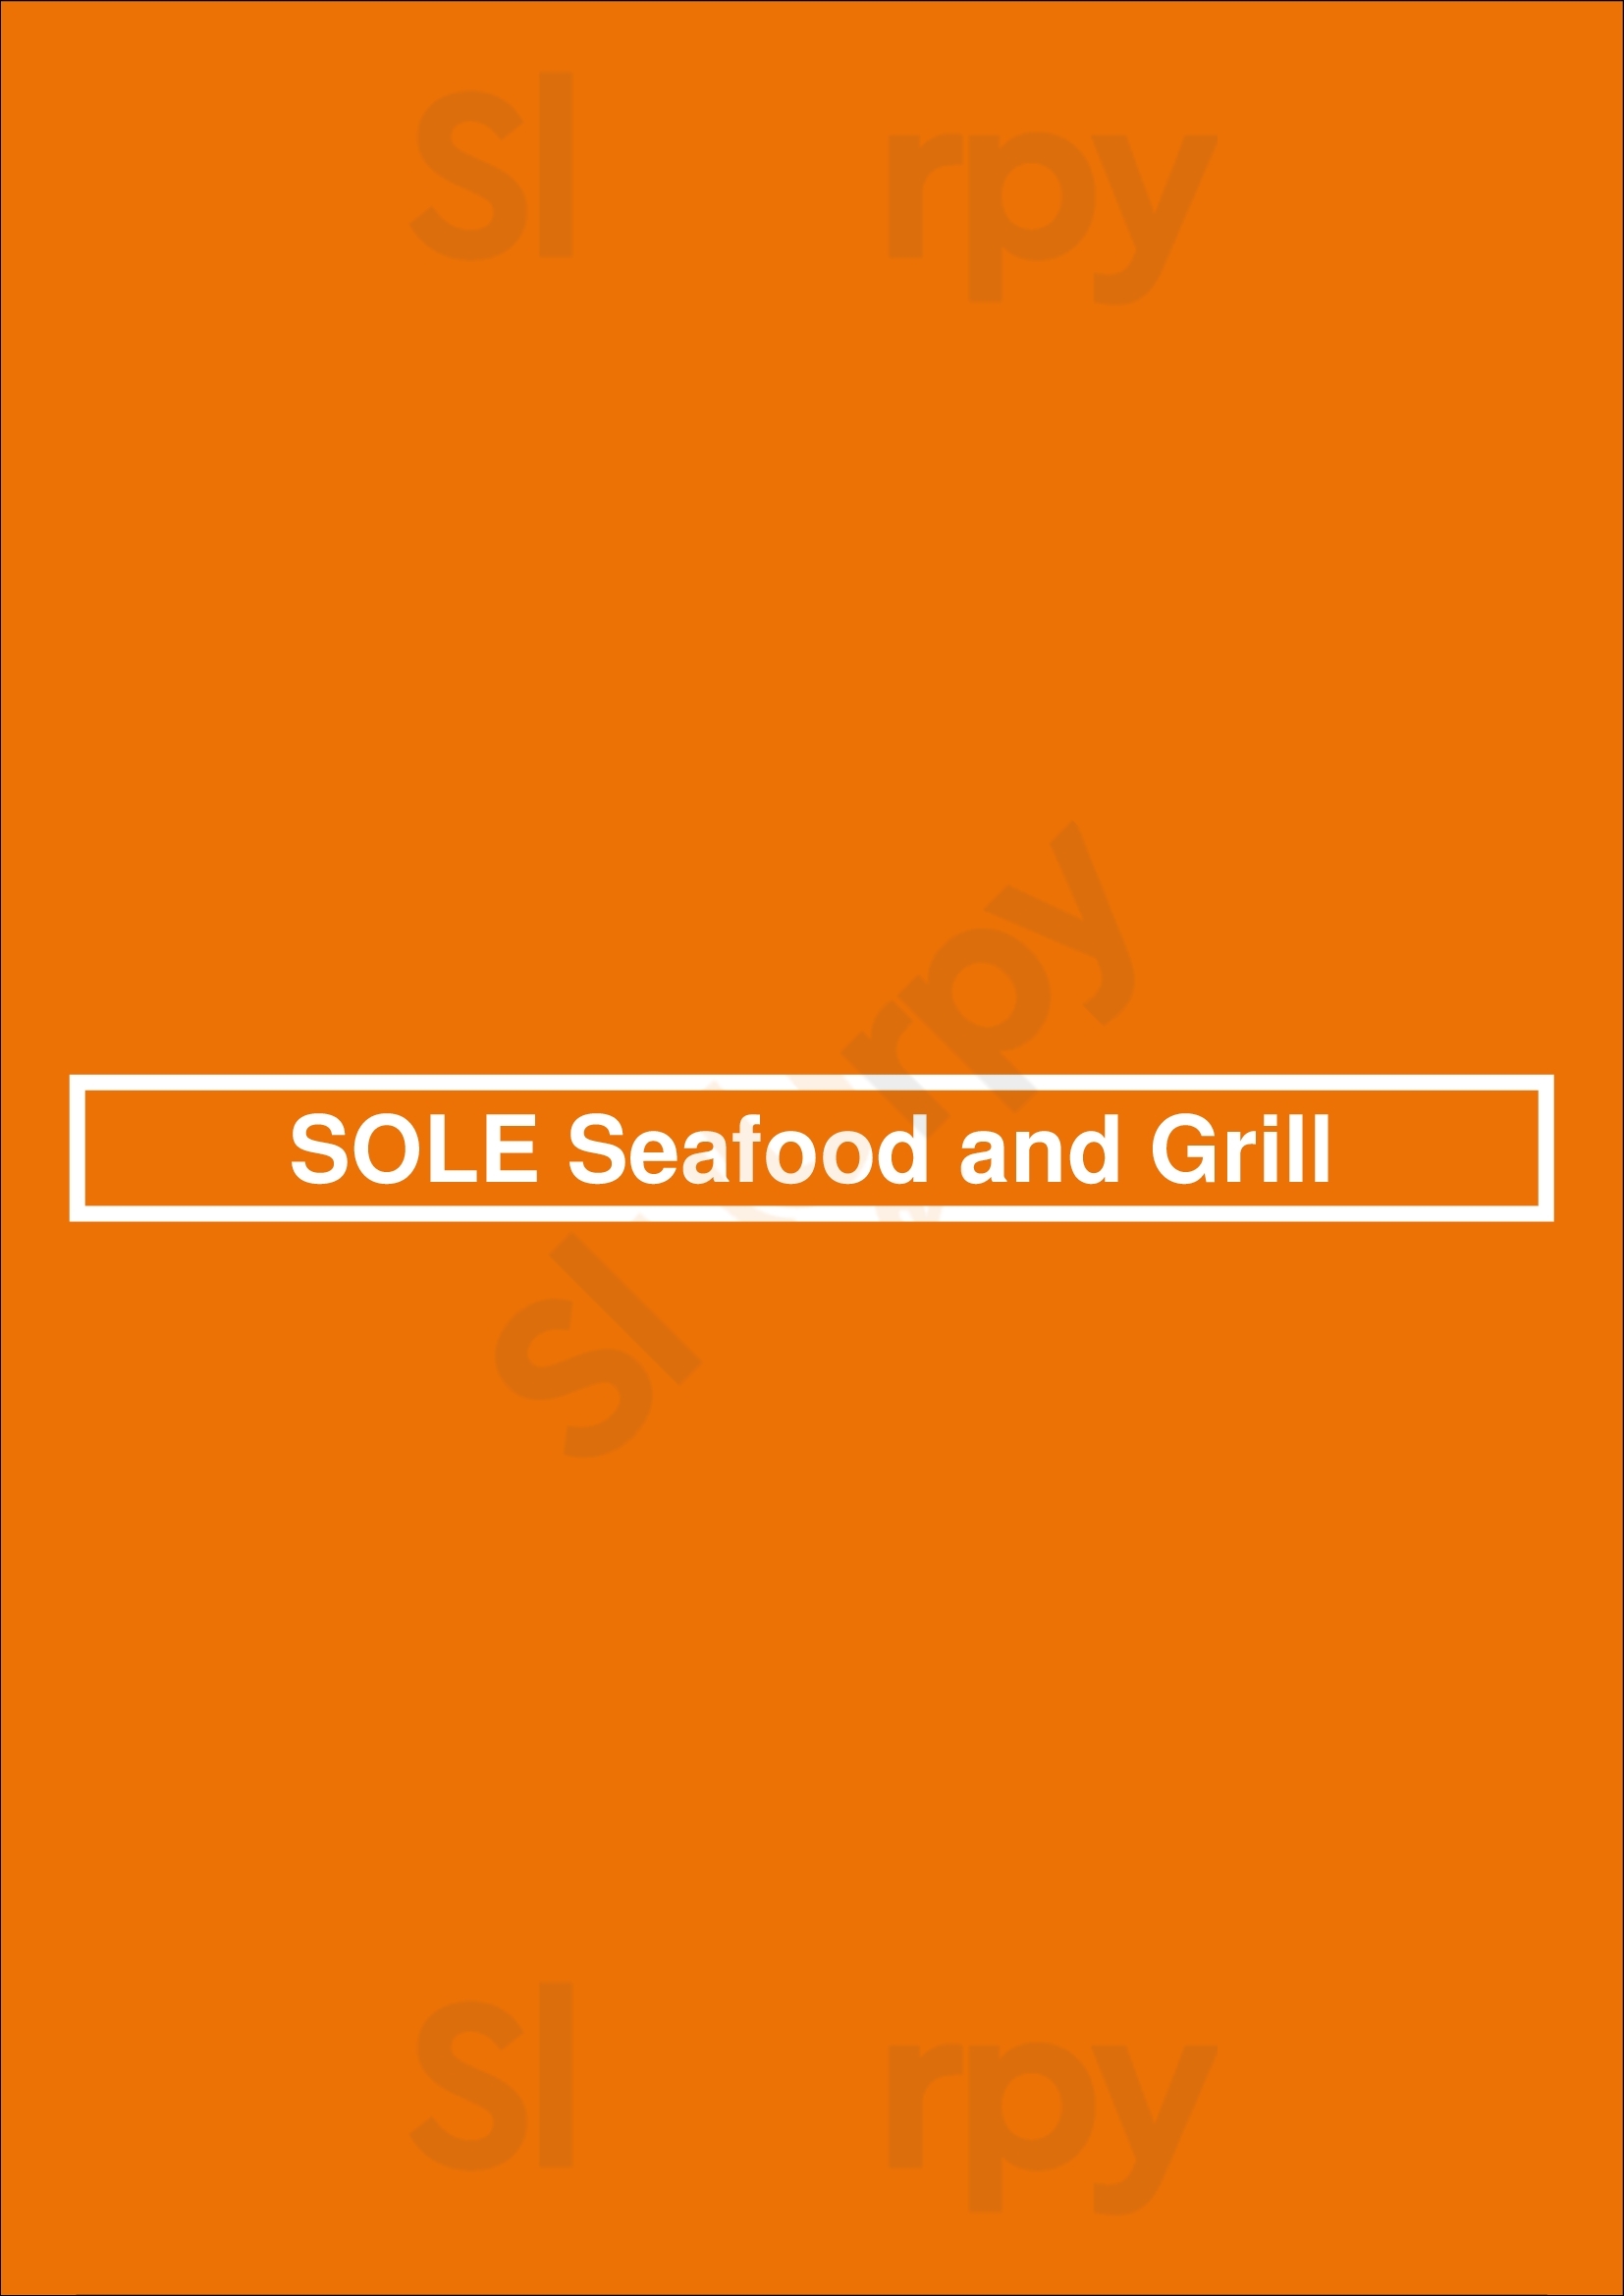 Sole Seafood And Grill Dublin Menu - 1